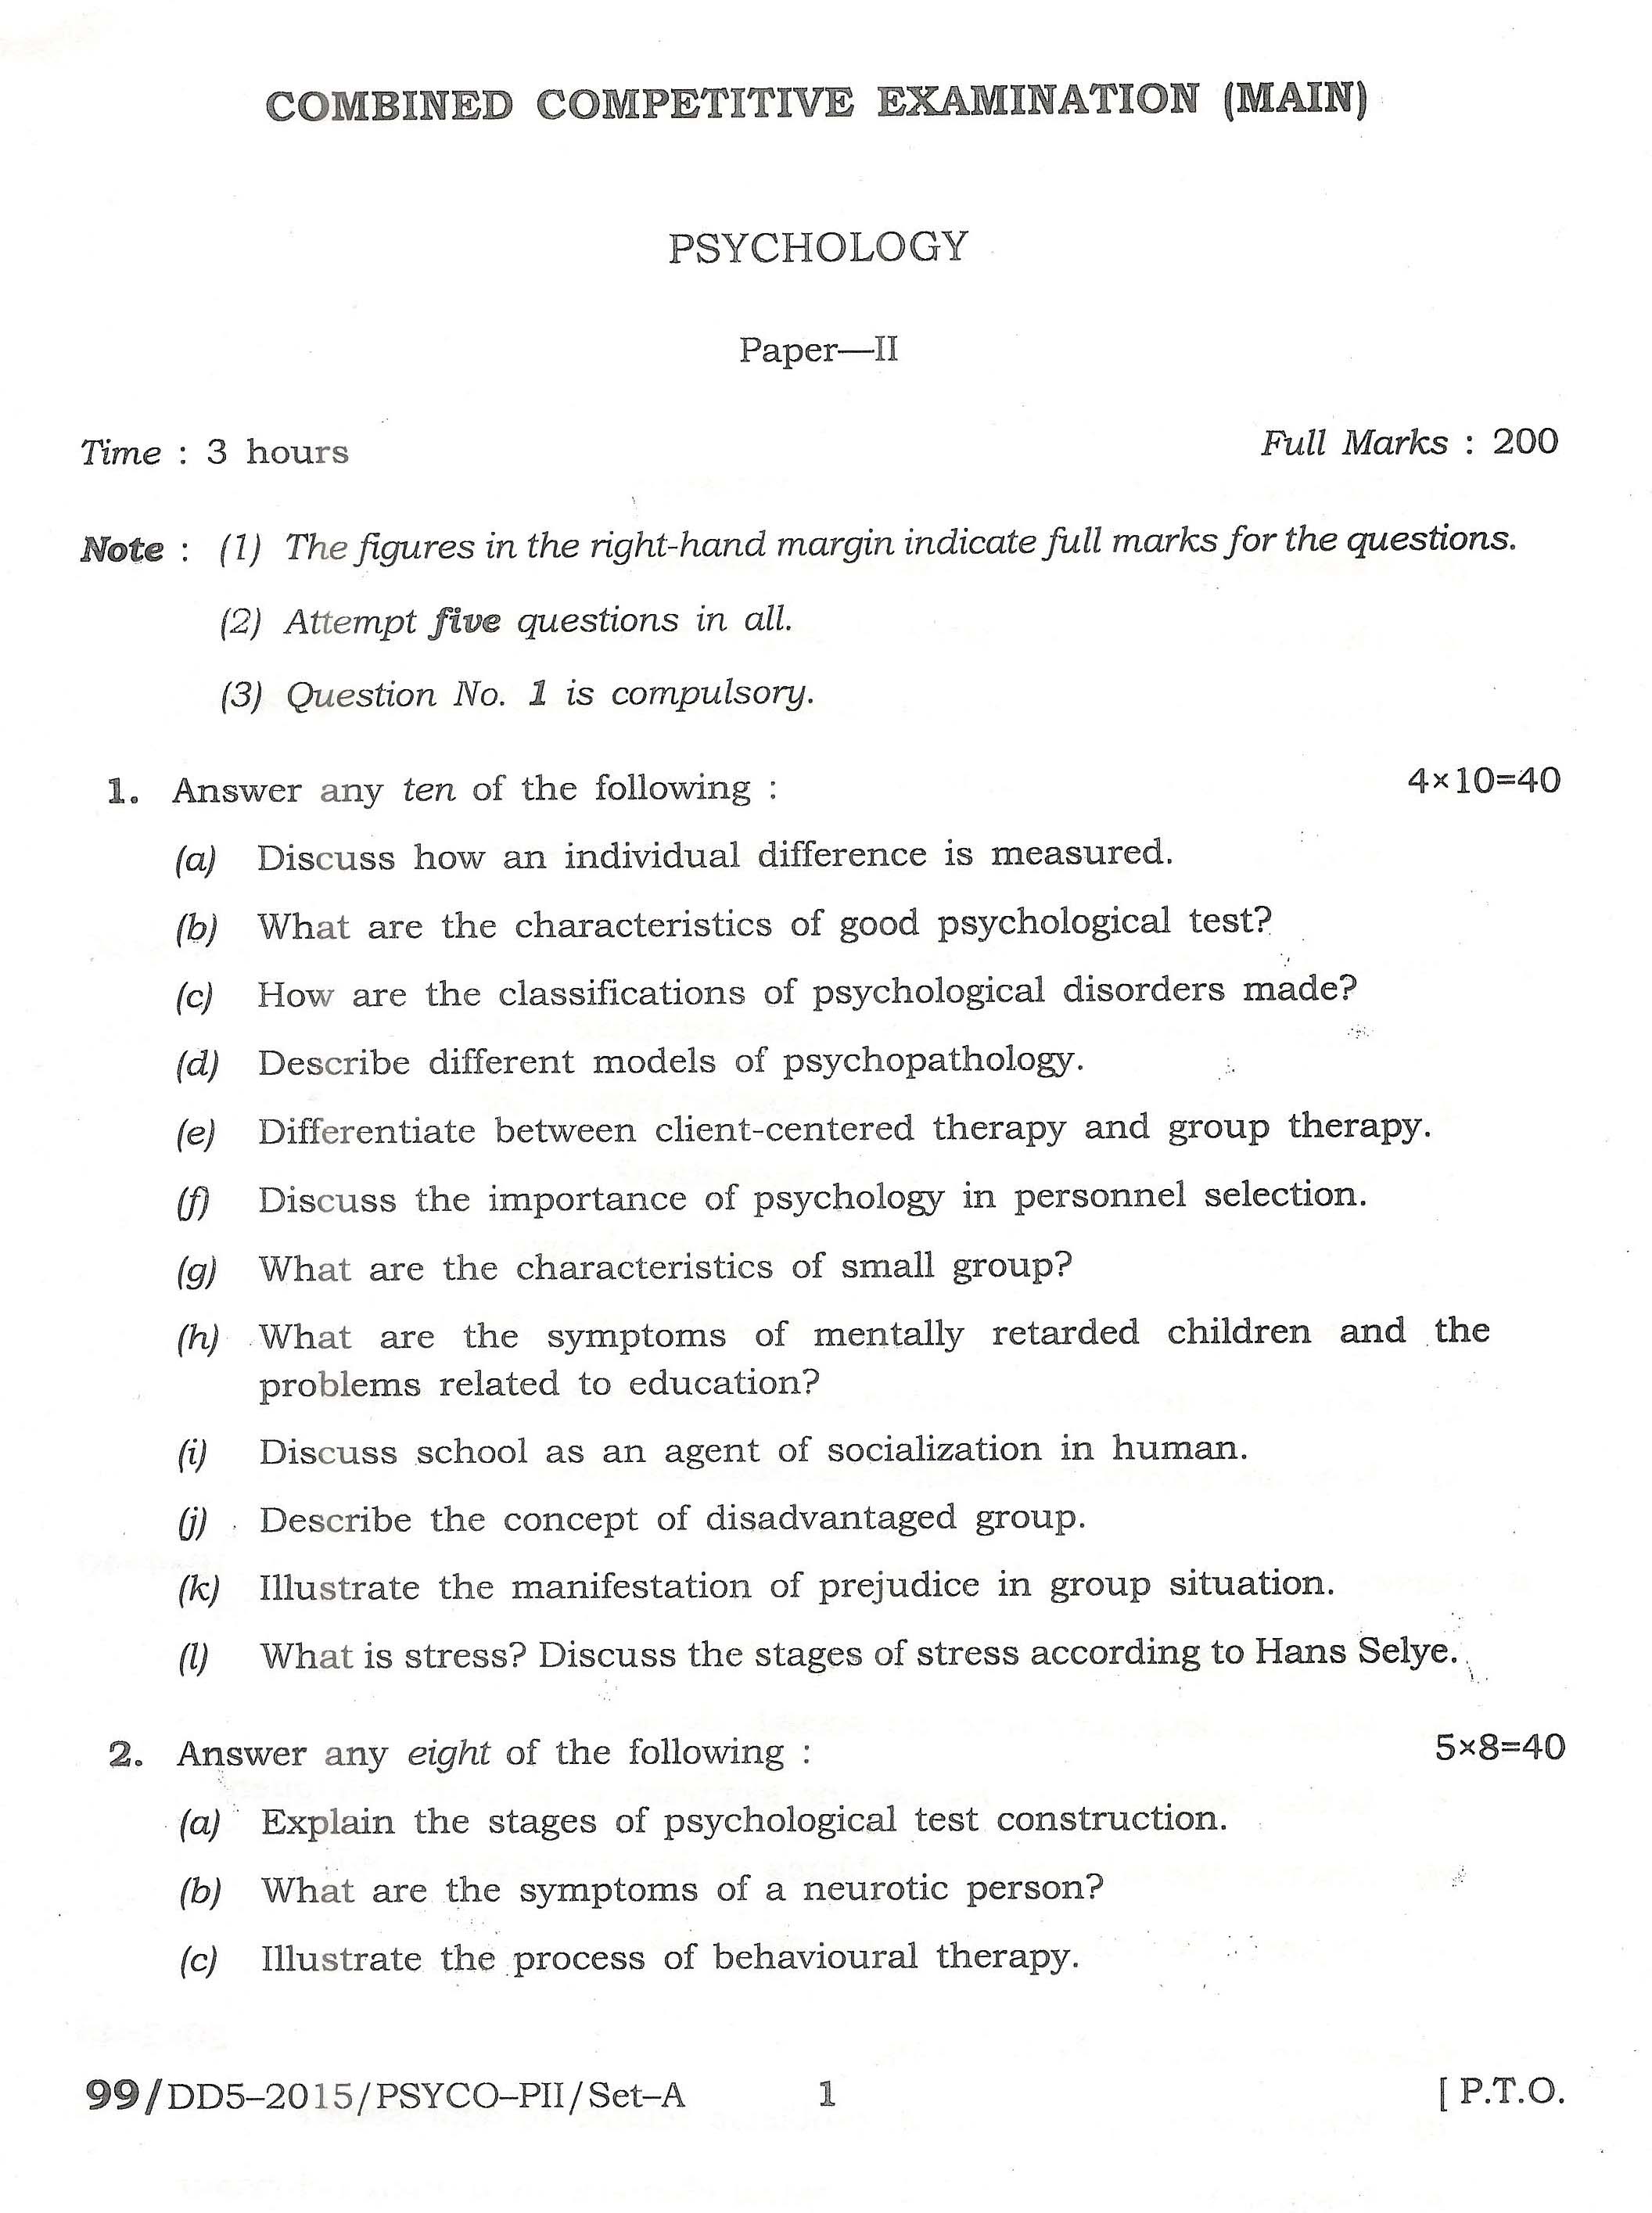 APPSC Combined Competitive Main Exam 2015 Psychology Paper II 1